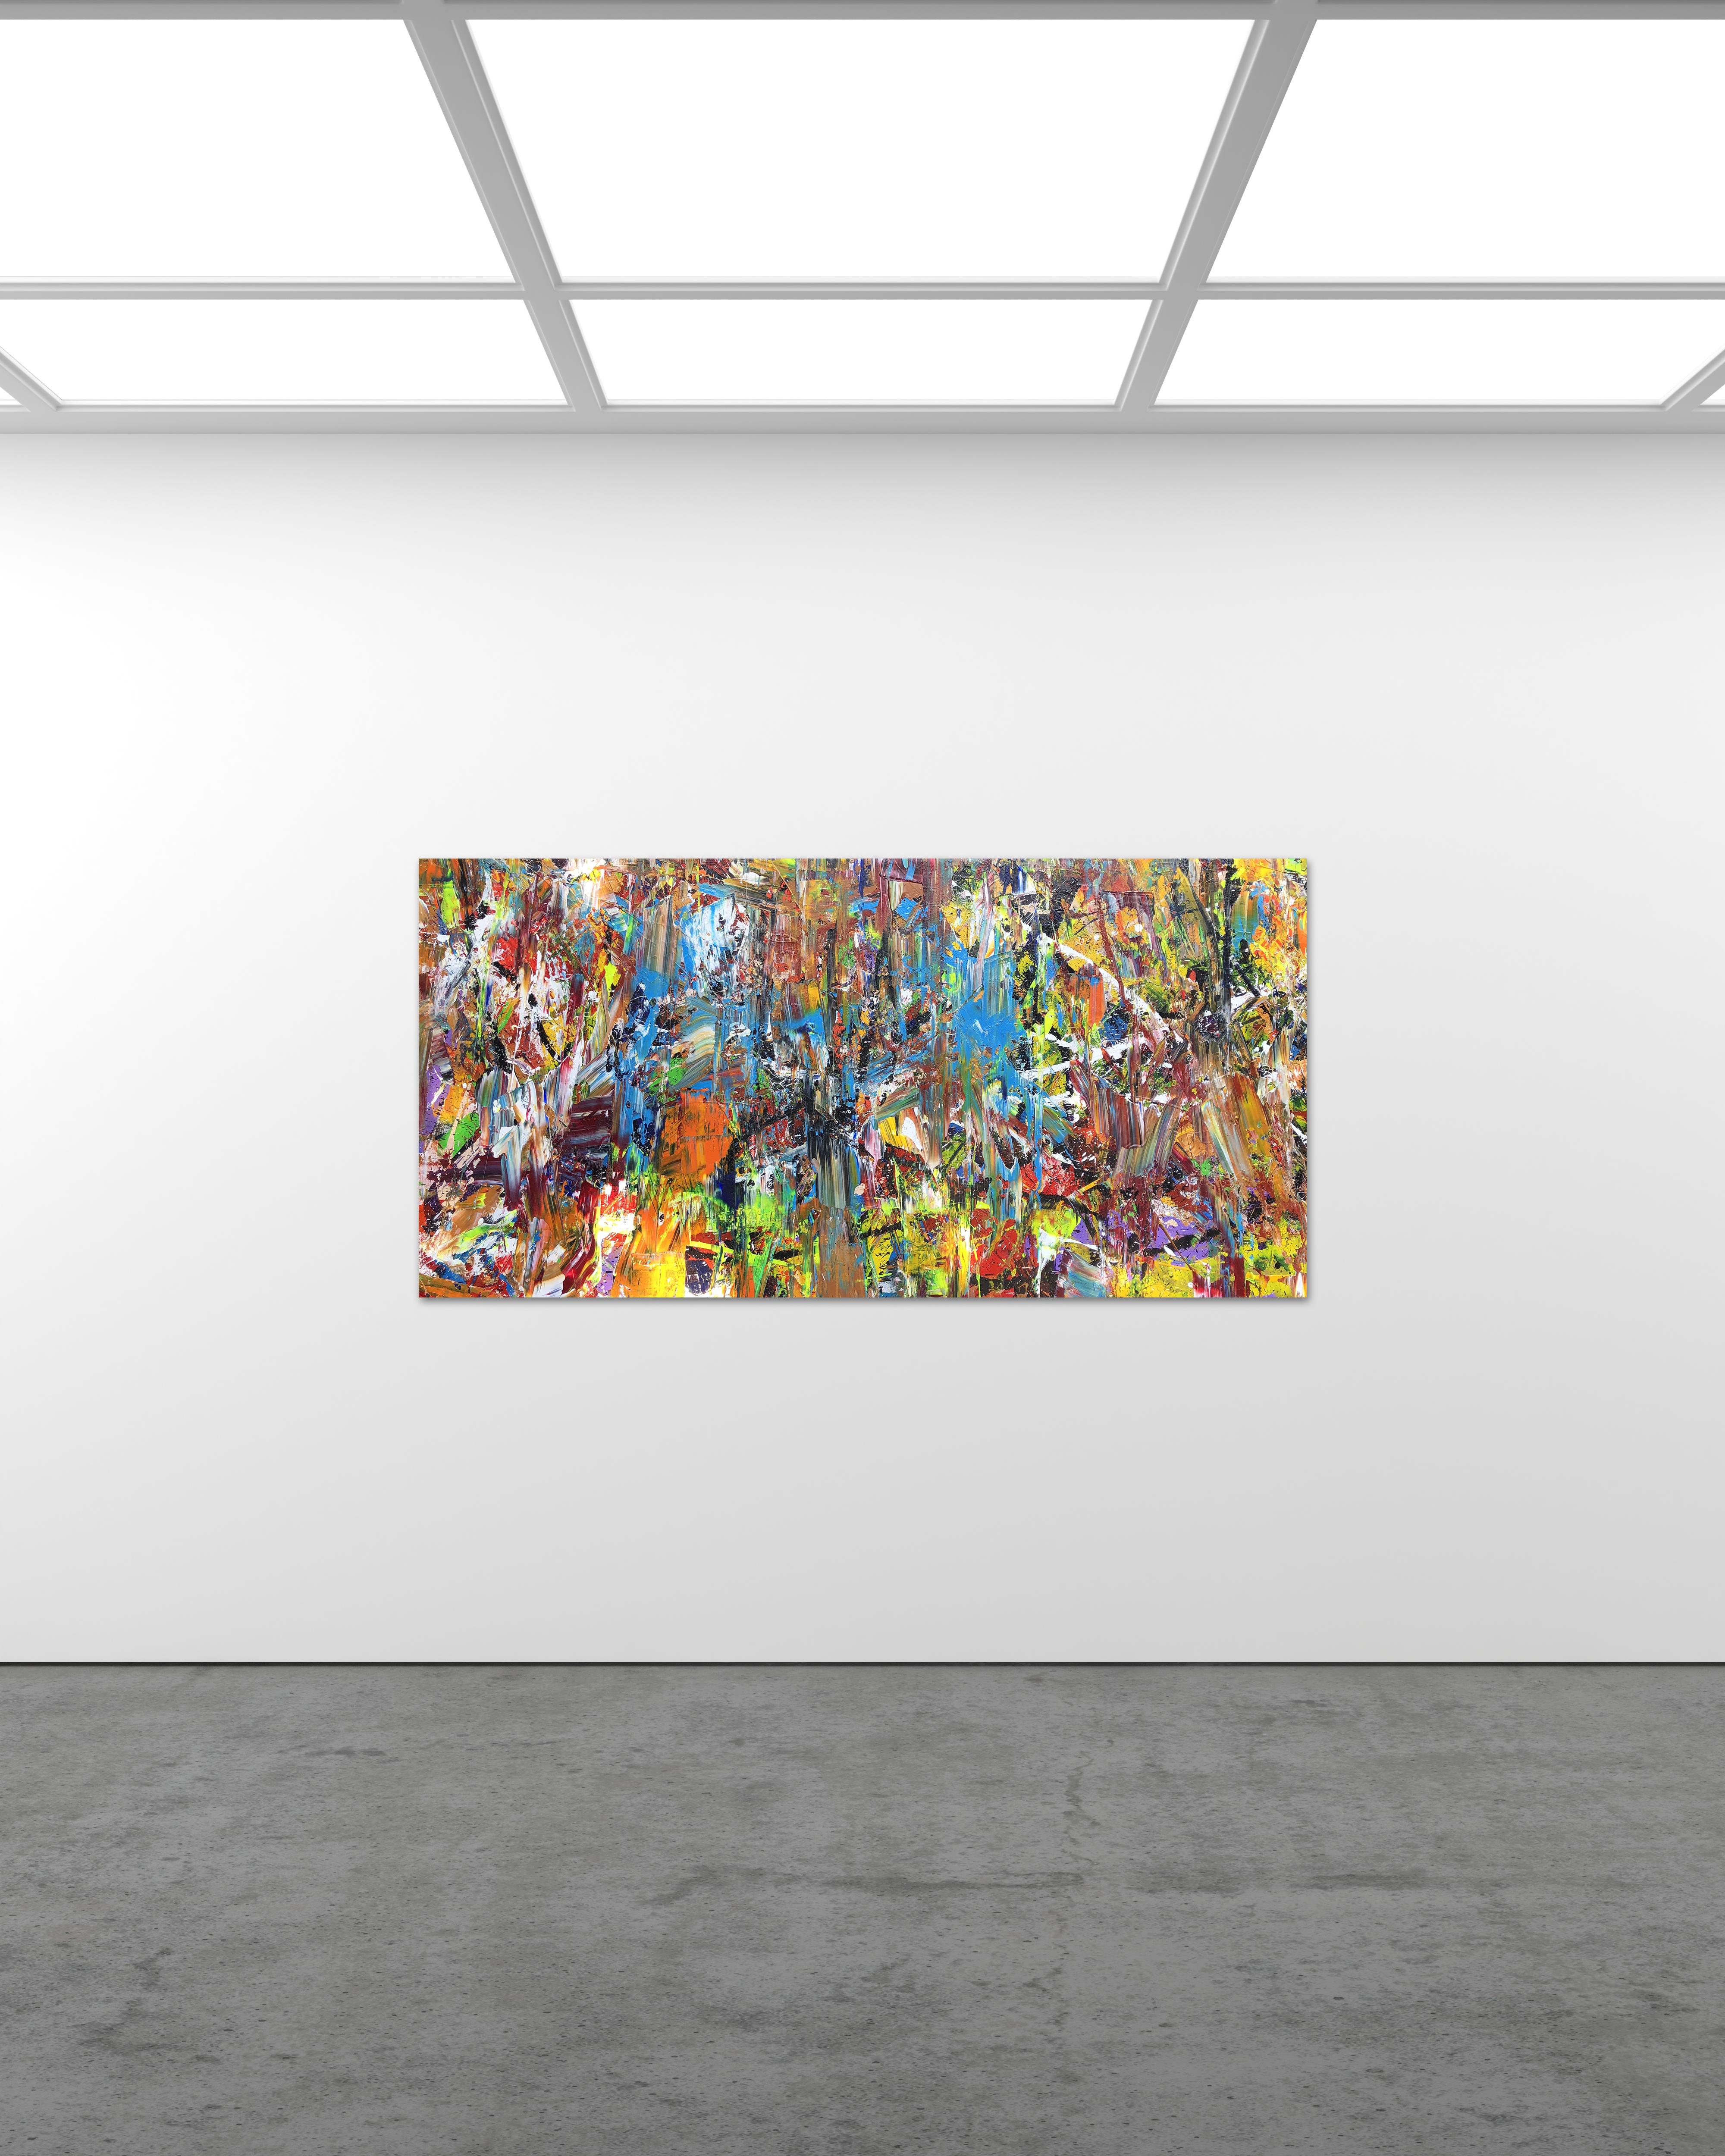 Electric city is an acrylic abstract expressionist painting by Troy Smith from Troy Smith Studio. Energy and movement is apparent within the brushstroke and pallet work of this large action painted painting. Vivid colors make up the scene for a